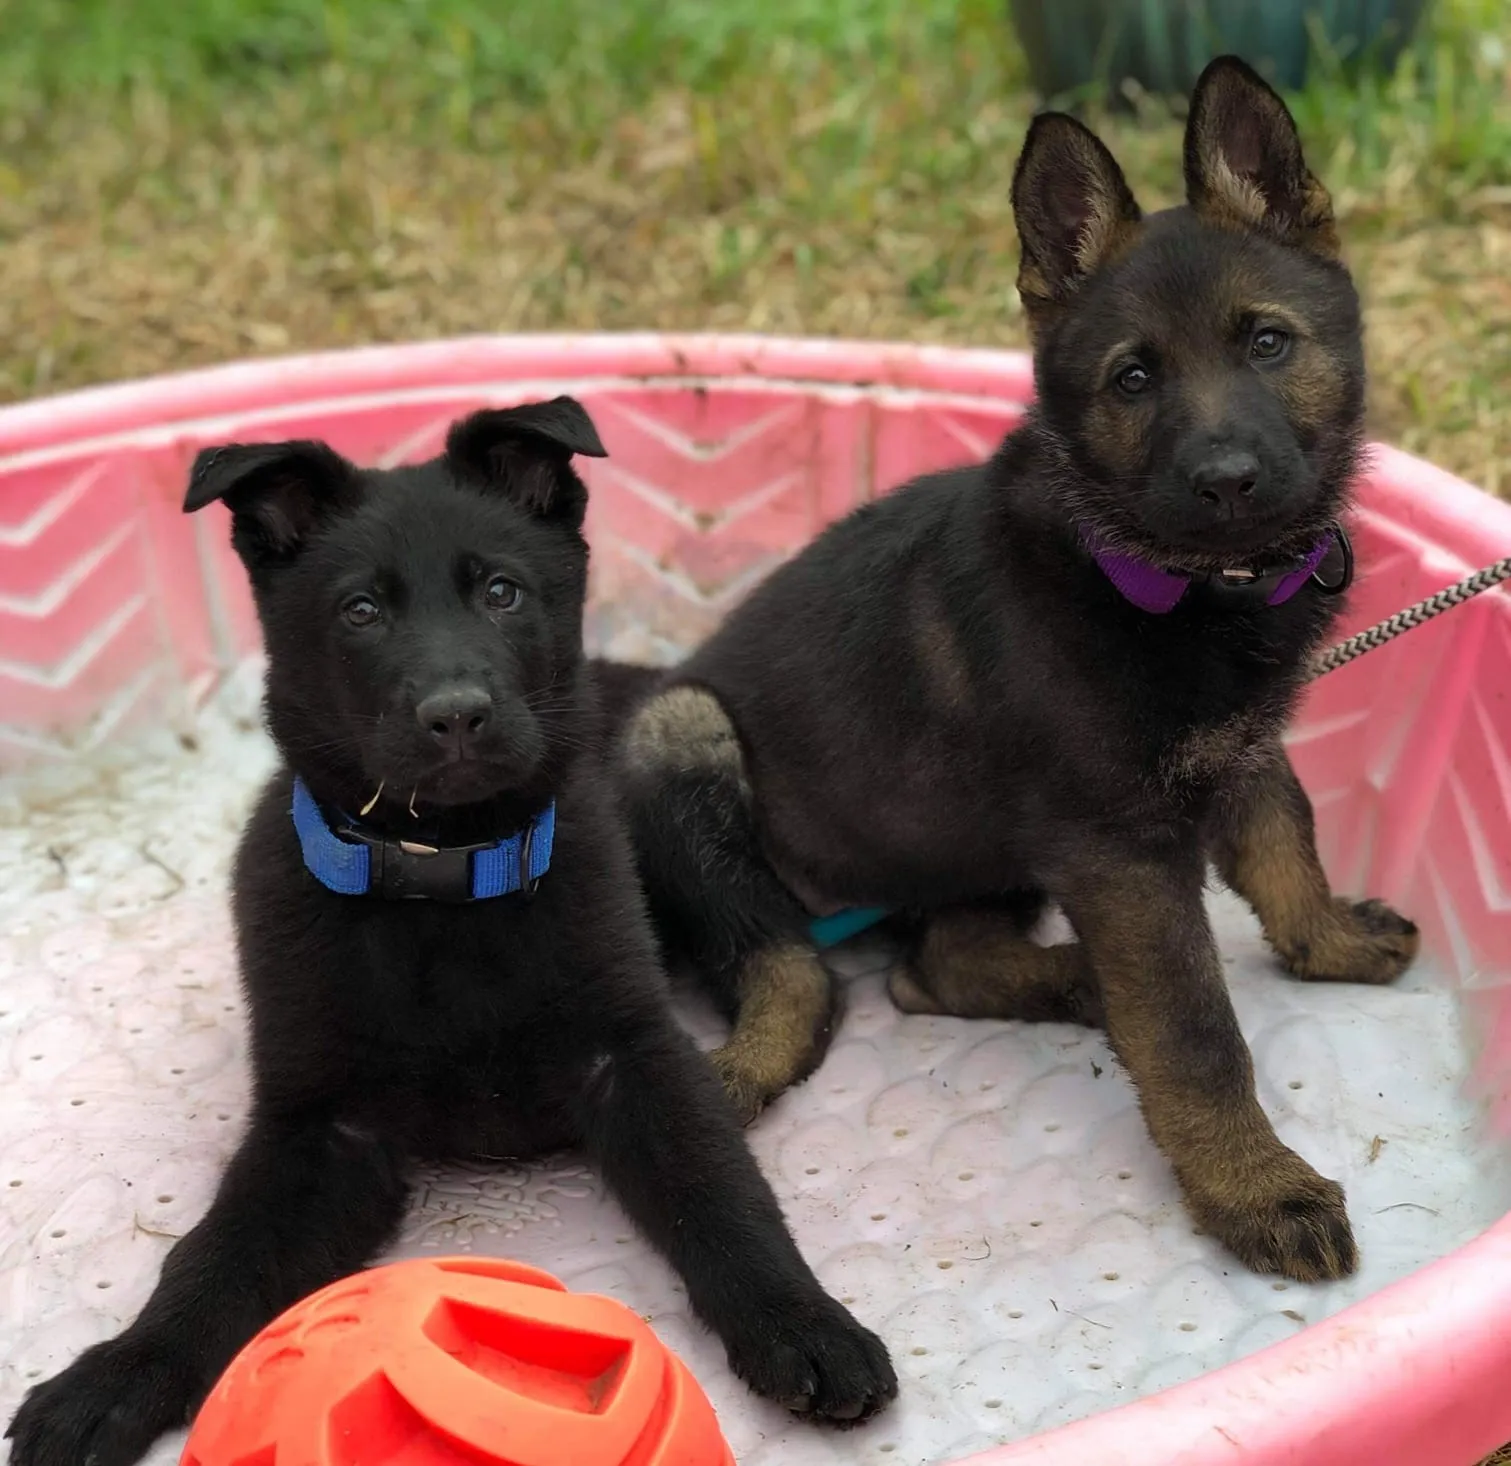 These are two 11 weeks old male (wearing blue collar, semi-erect ears) and female(wearing purple collar) working line German Shepherd puppies. The female puppy has delicate facial features and a narrower frame overall. The male puppy looks assertive. 